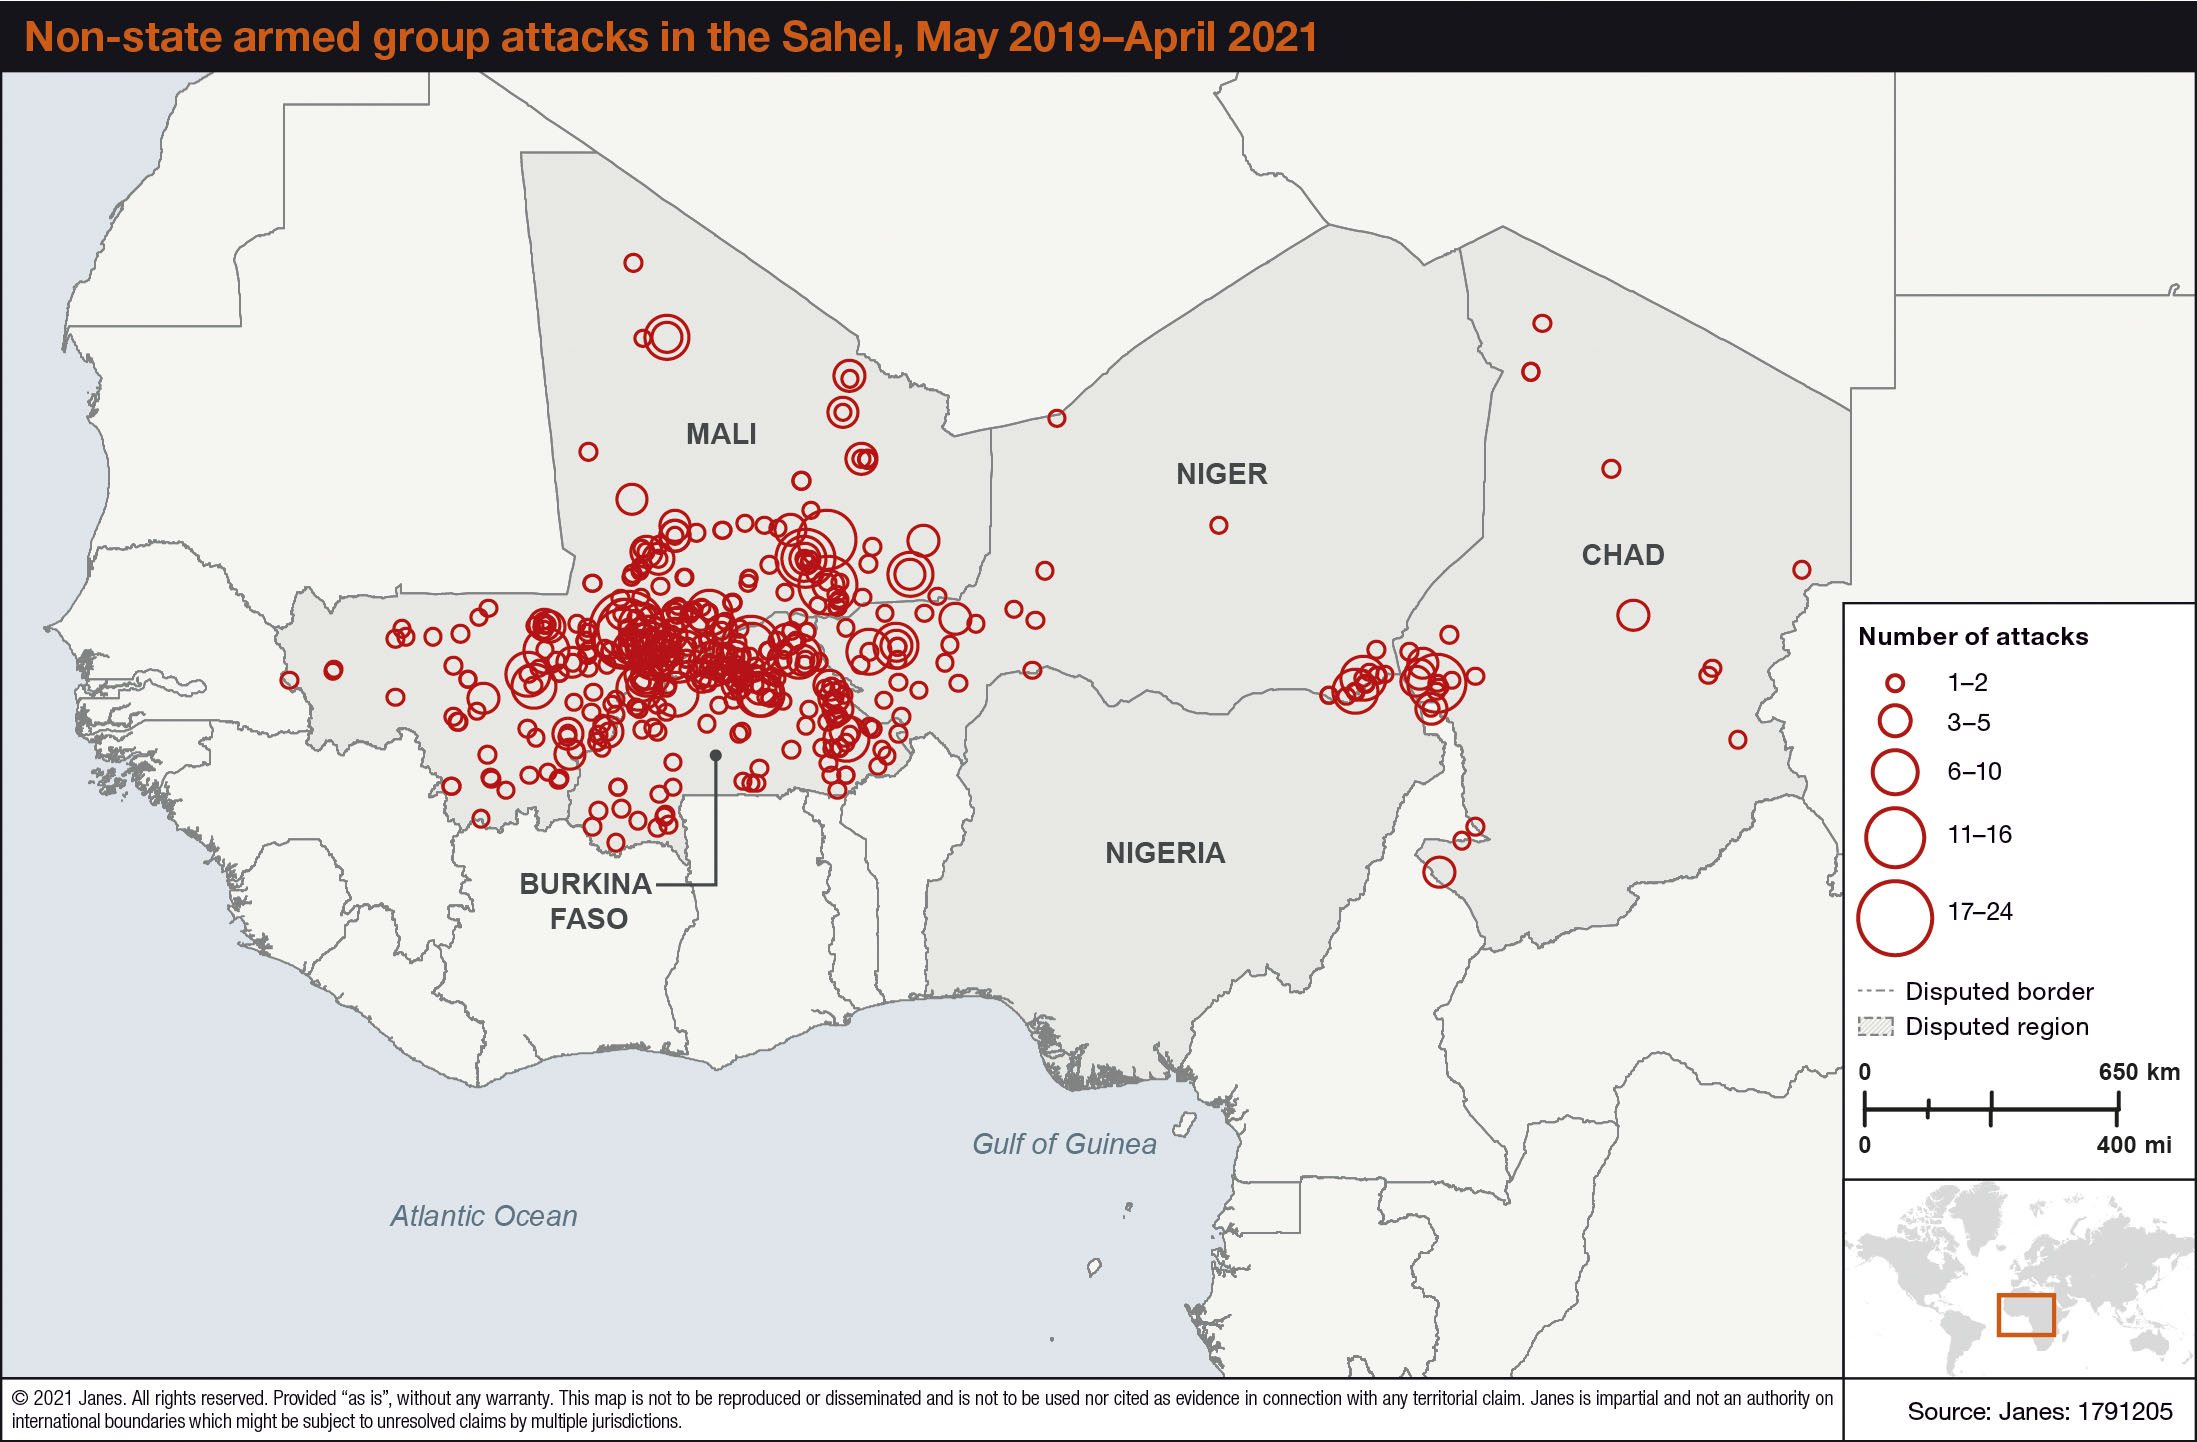 Non-state armed group attacks in the Sahel, May 2019-April 2021. Data provided by Janes Terrorism and Insurgency Centre (JTIC). (©2021 Janes)